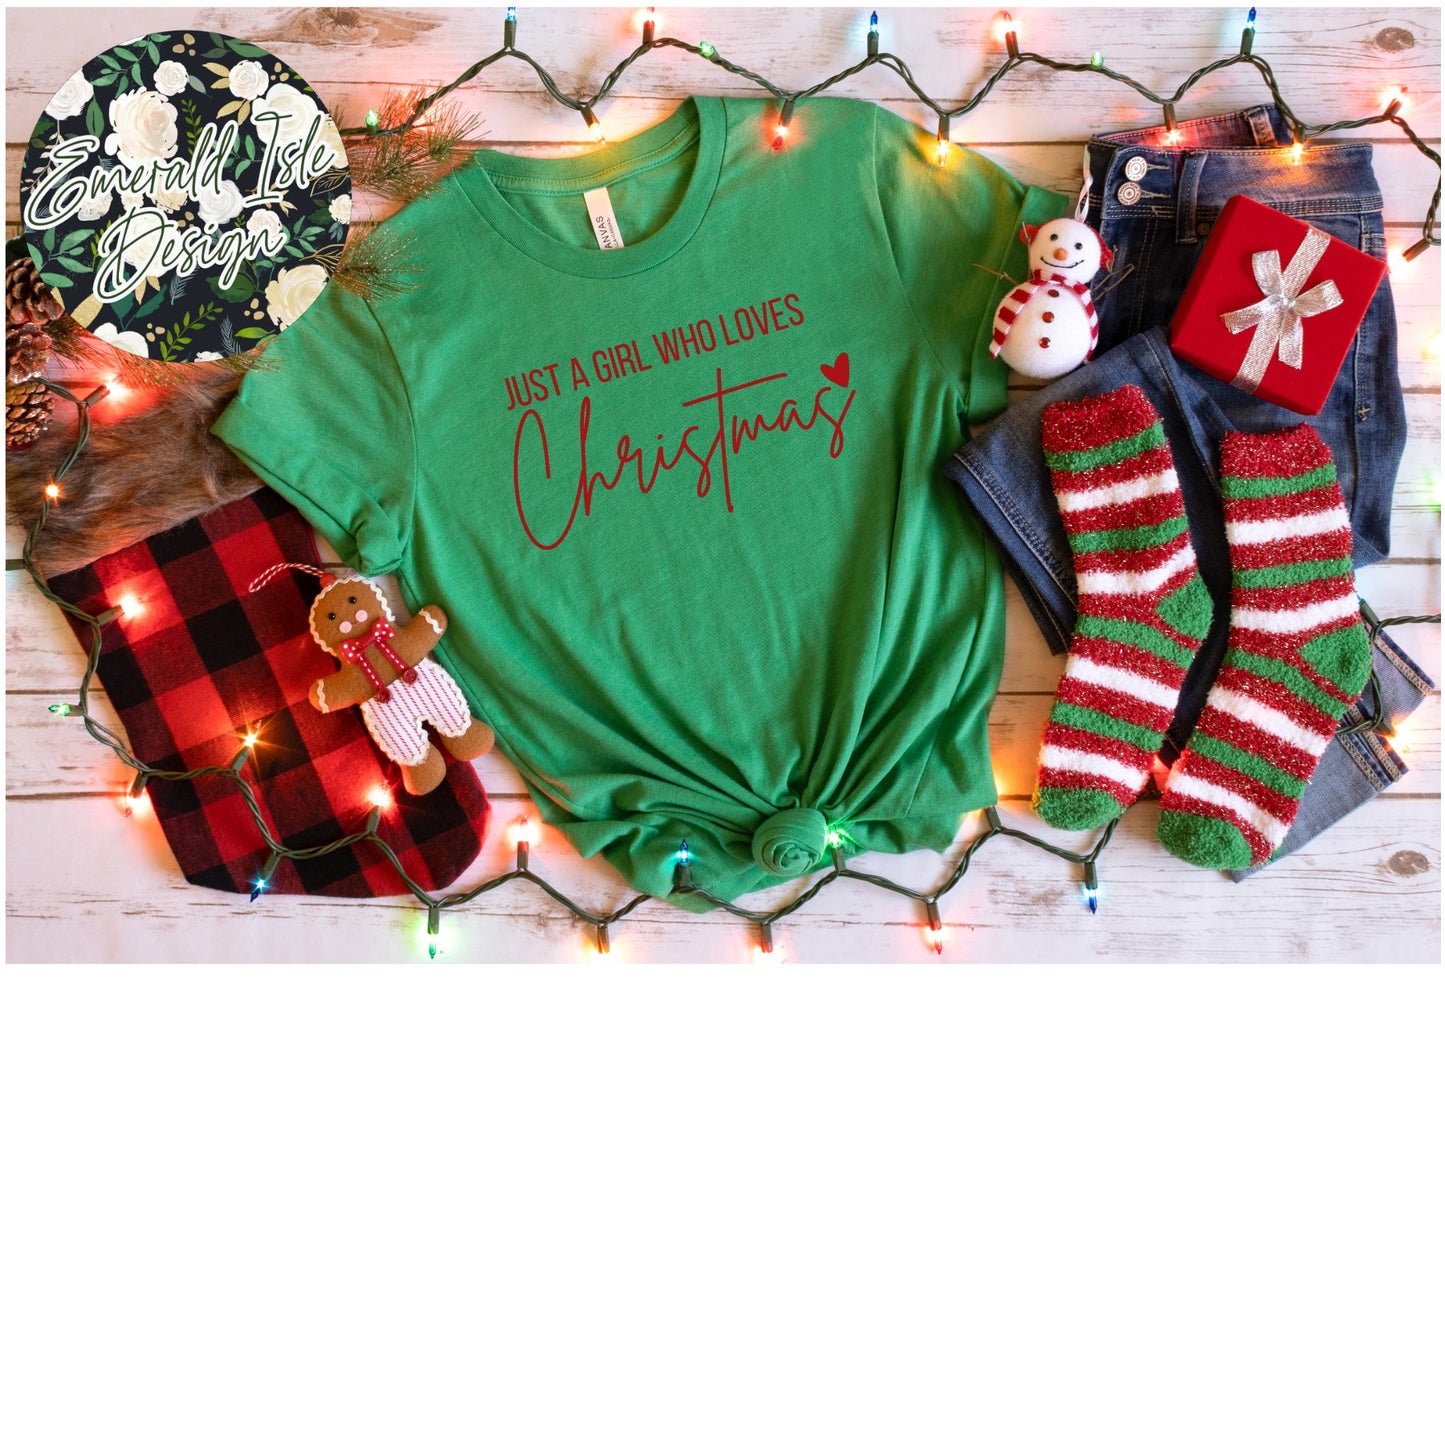 SALE** Just a Girl Who Loves Christmas Design